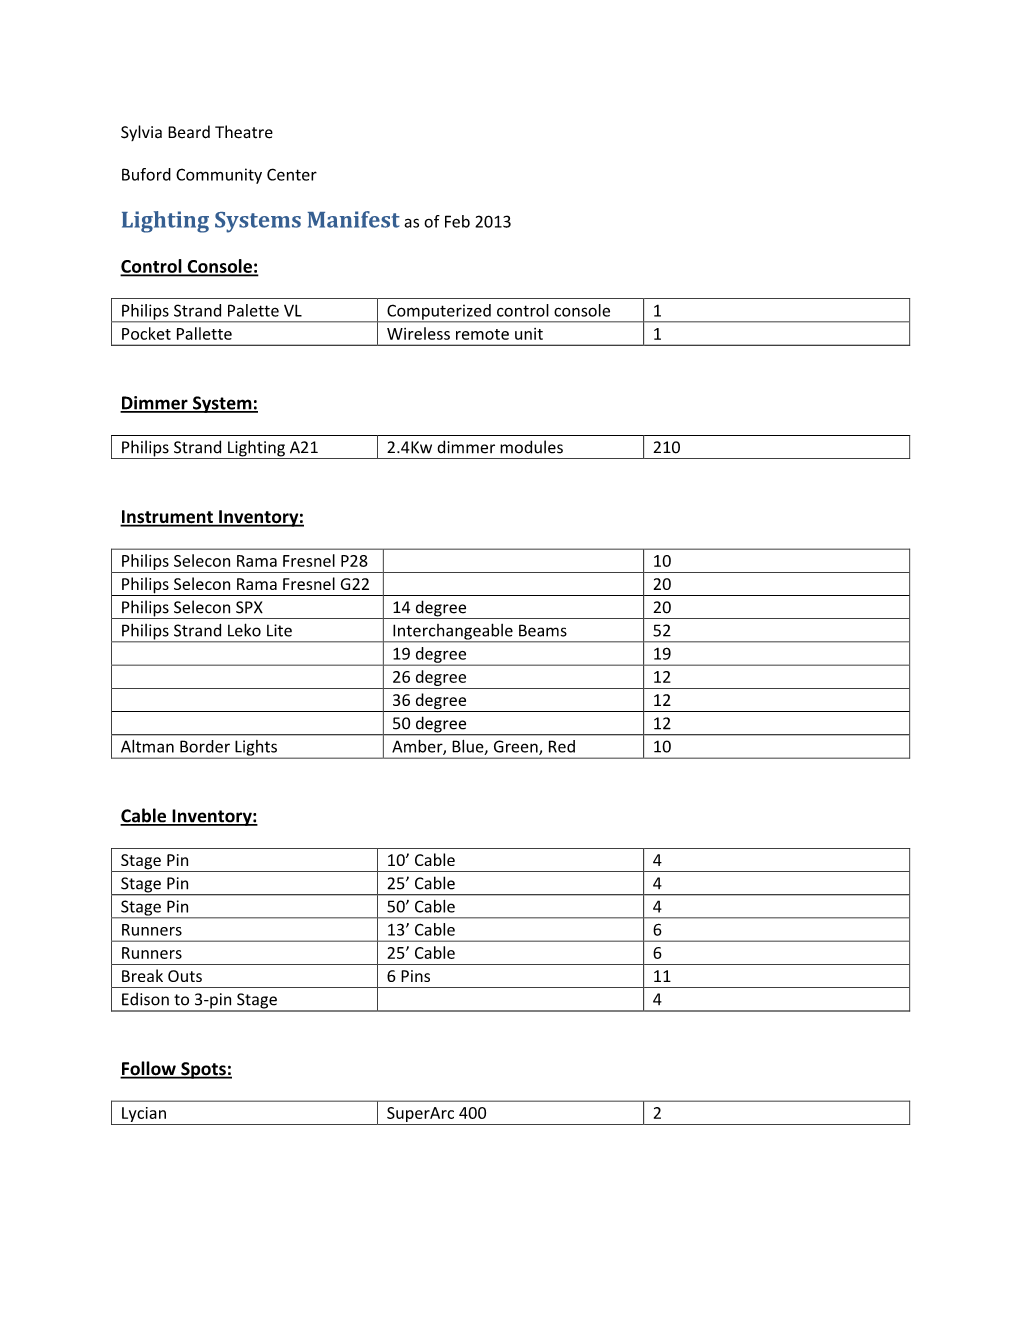 Lighting Systems Manifest As of Feb 2013